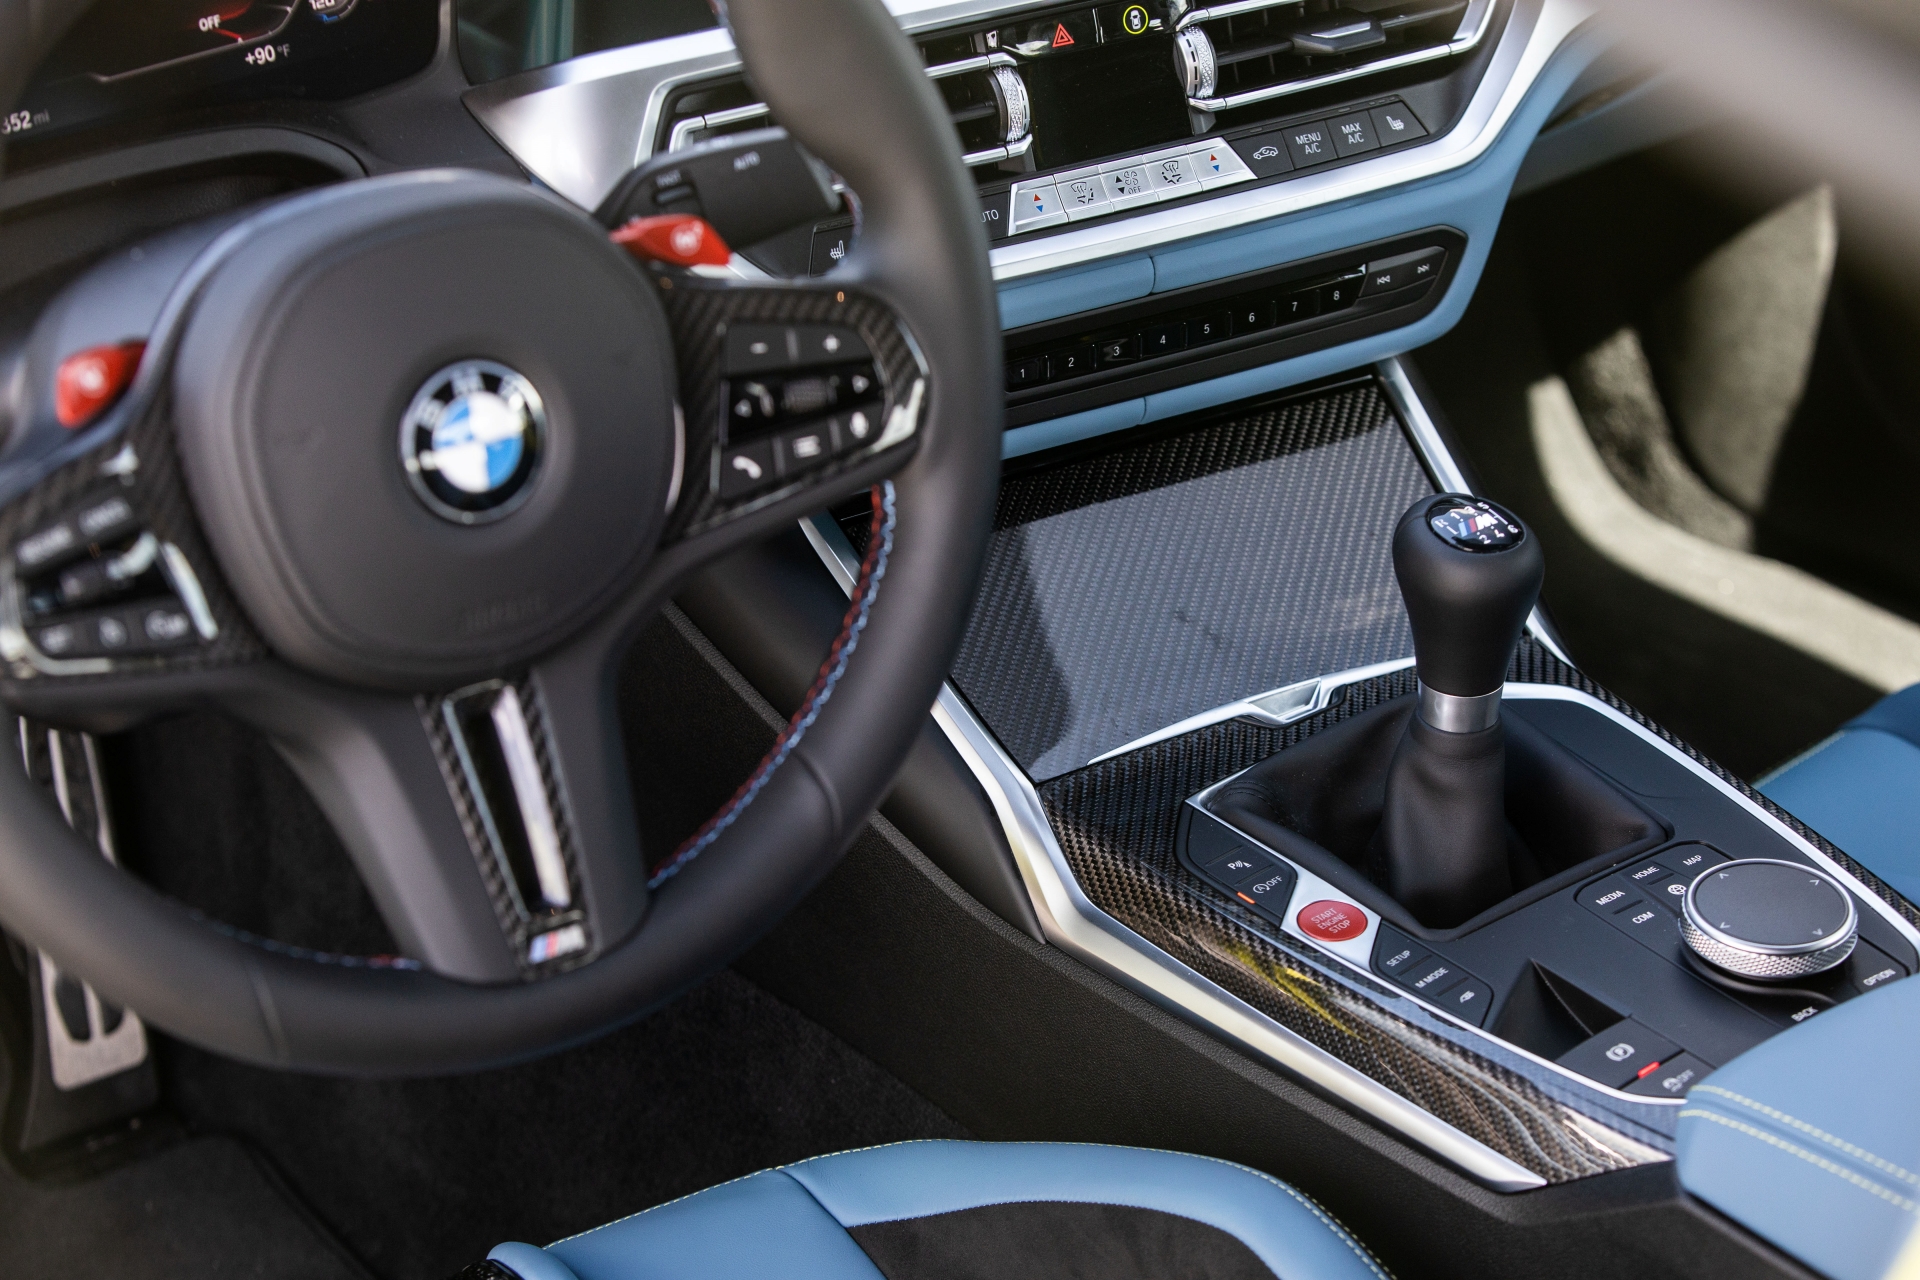 VIDEO BMW M4 Manual See the Exterior and Interior in Detail